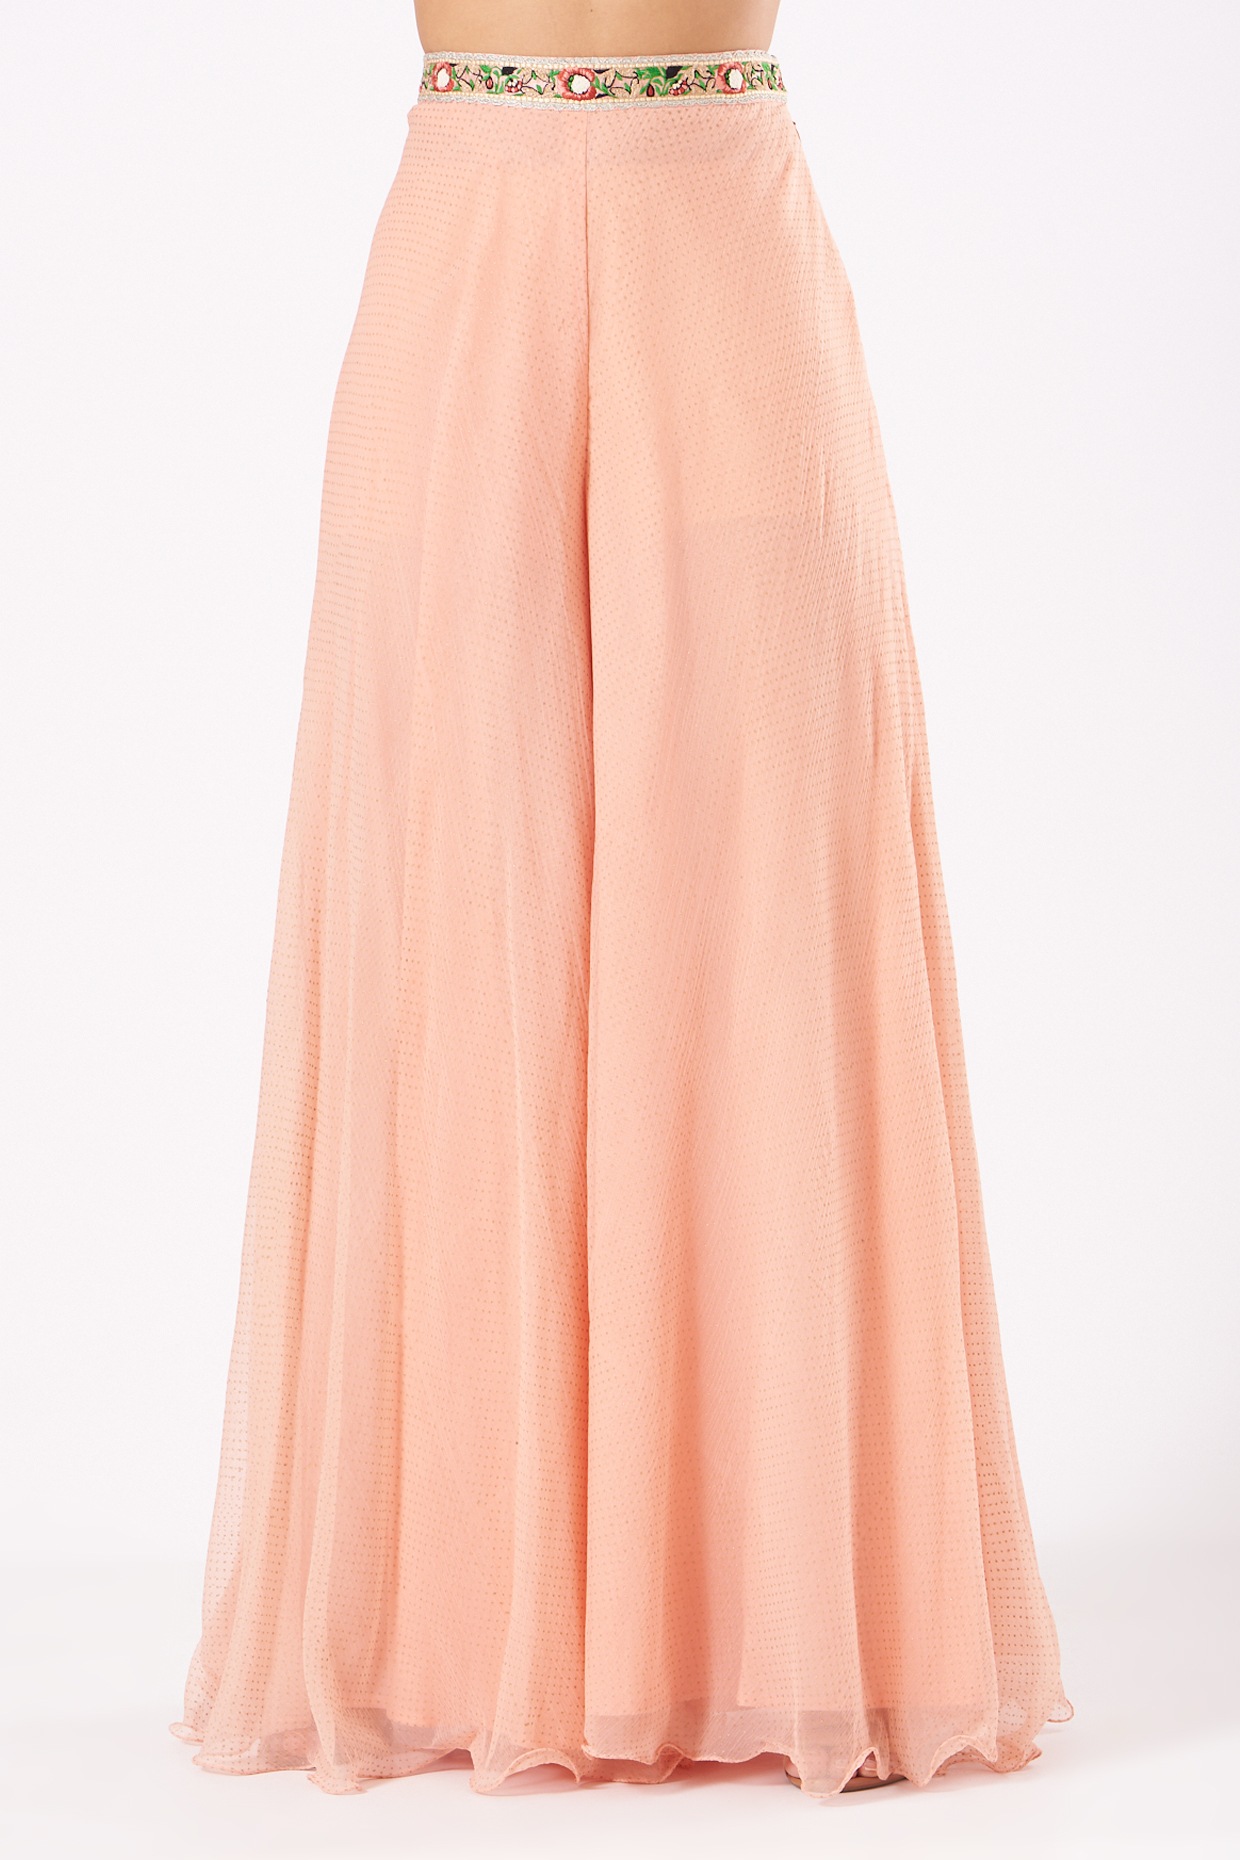 Buy Peach Color Rayon Palazzo Online at Low Prices in India - Paytmmall.com